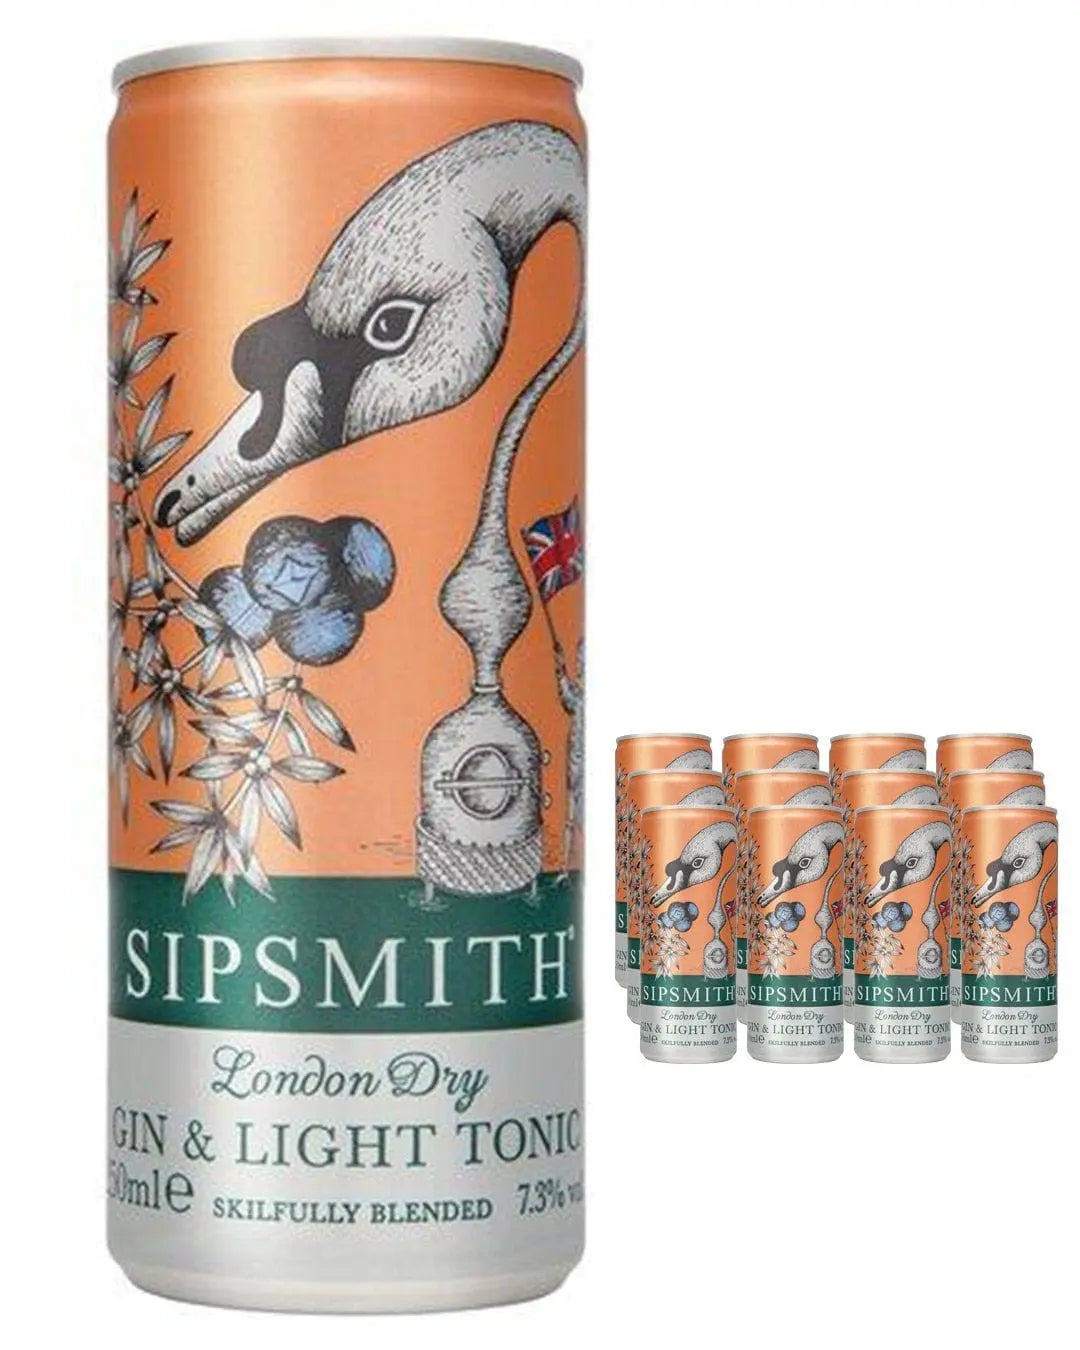 Sipsmith London Dry Gin & Light Tonic Premixed Cocktail Can Multipack, 12 x 250 ml Ready Made Cocktails